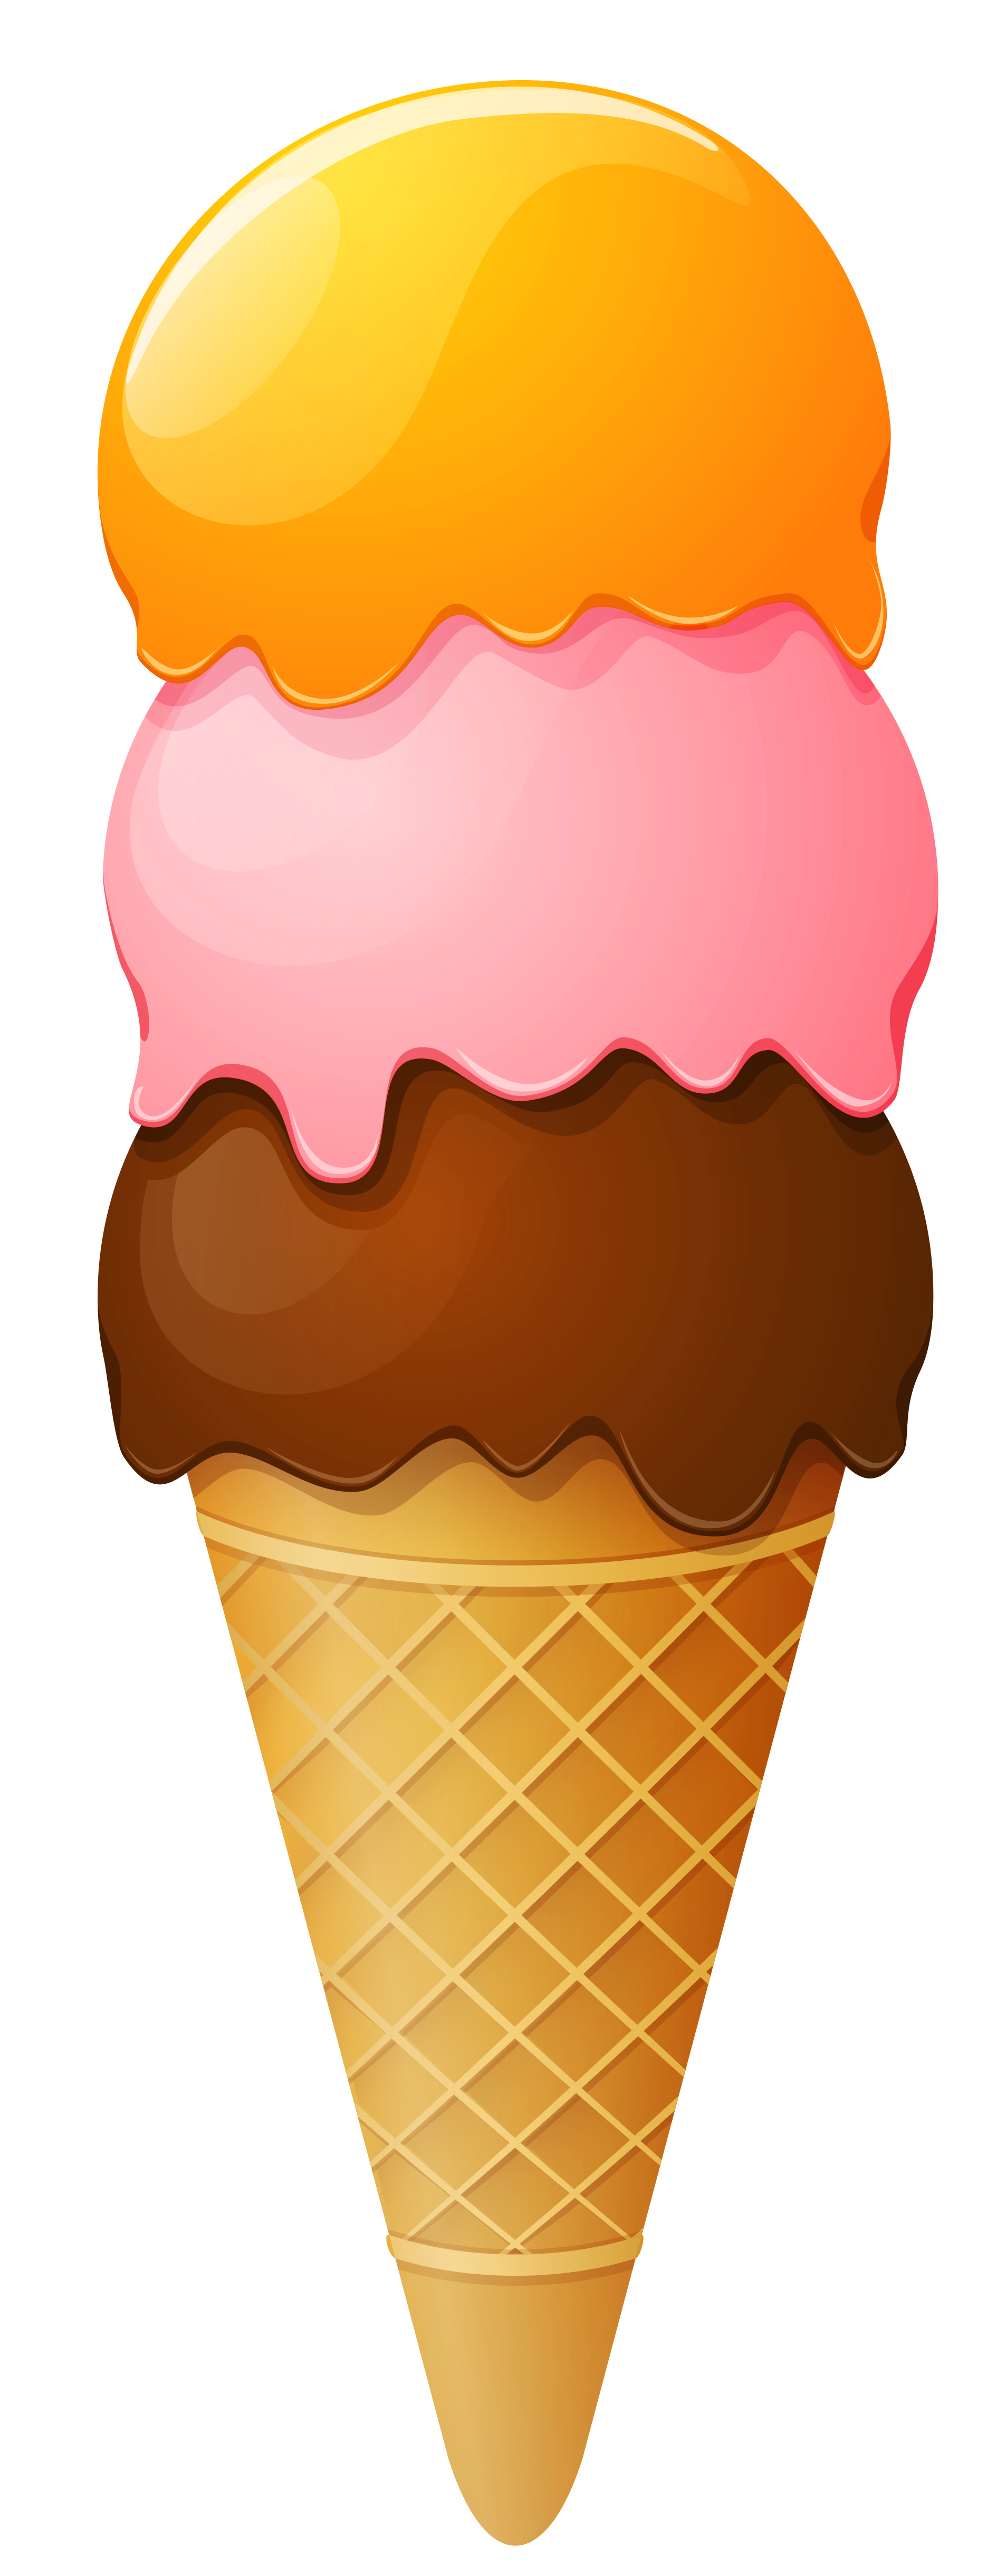 Ice Cream Cone PNG Picture PNG, SVG Clip art for Web - Download Clip Art, PNG Icon Arts